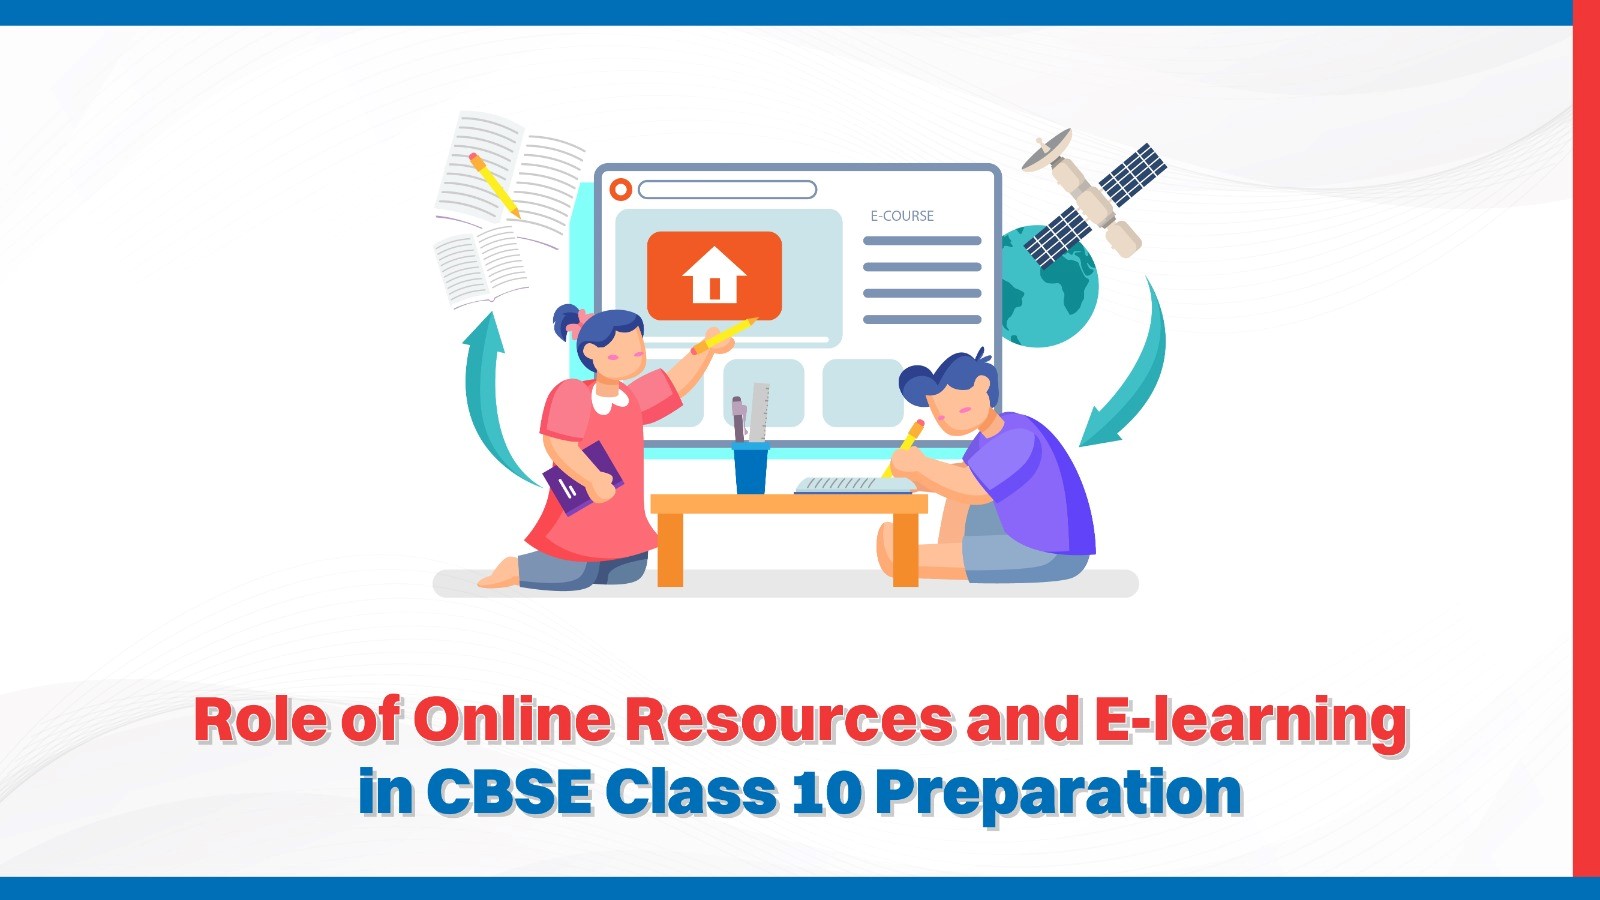 Role of Online Resources and E-learning in CBSE Class 10 Preparation.jpg